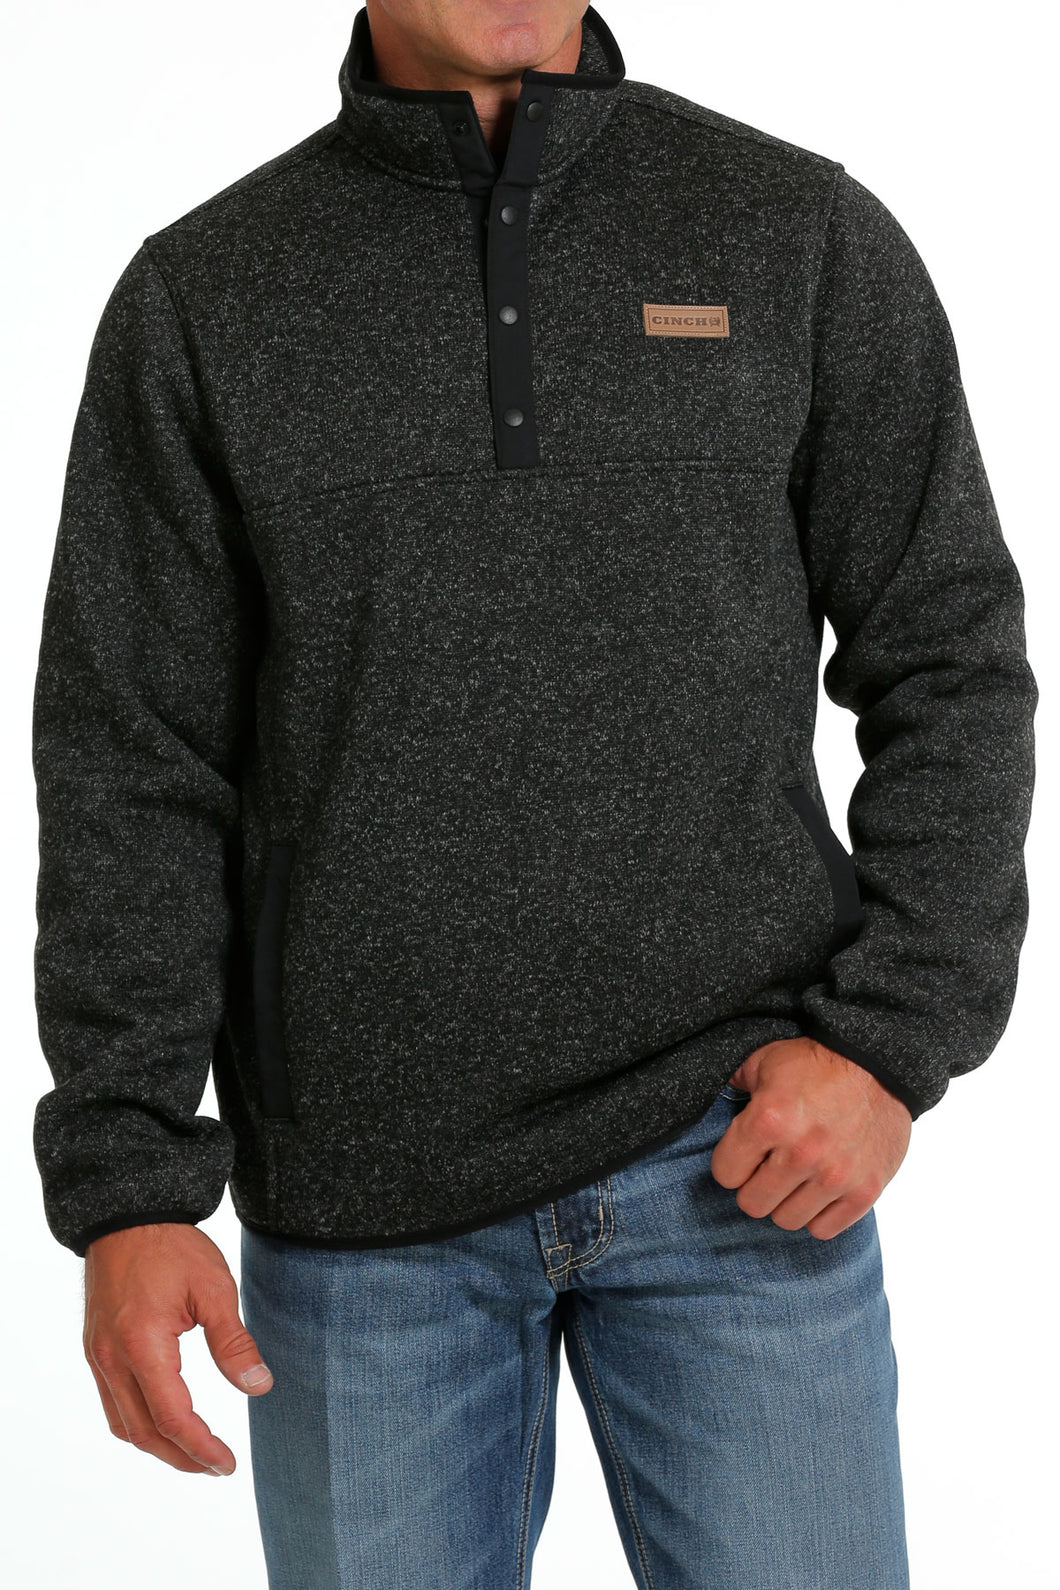 Pard's Western shop Cinch Men's Charcoal Sweater Knit Pullover